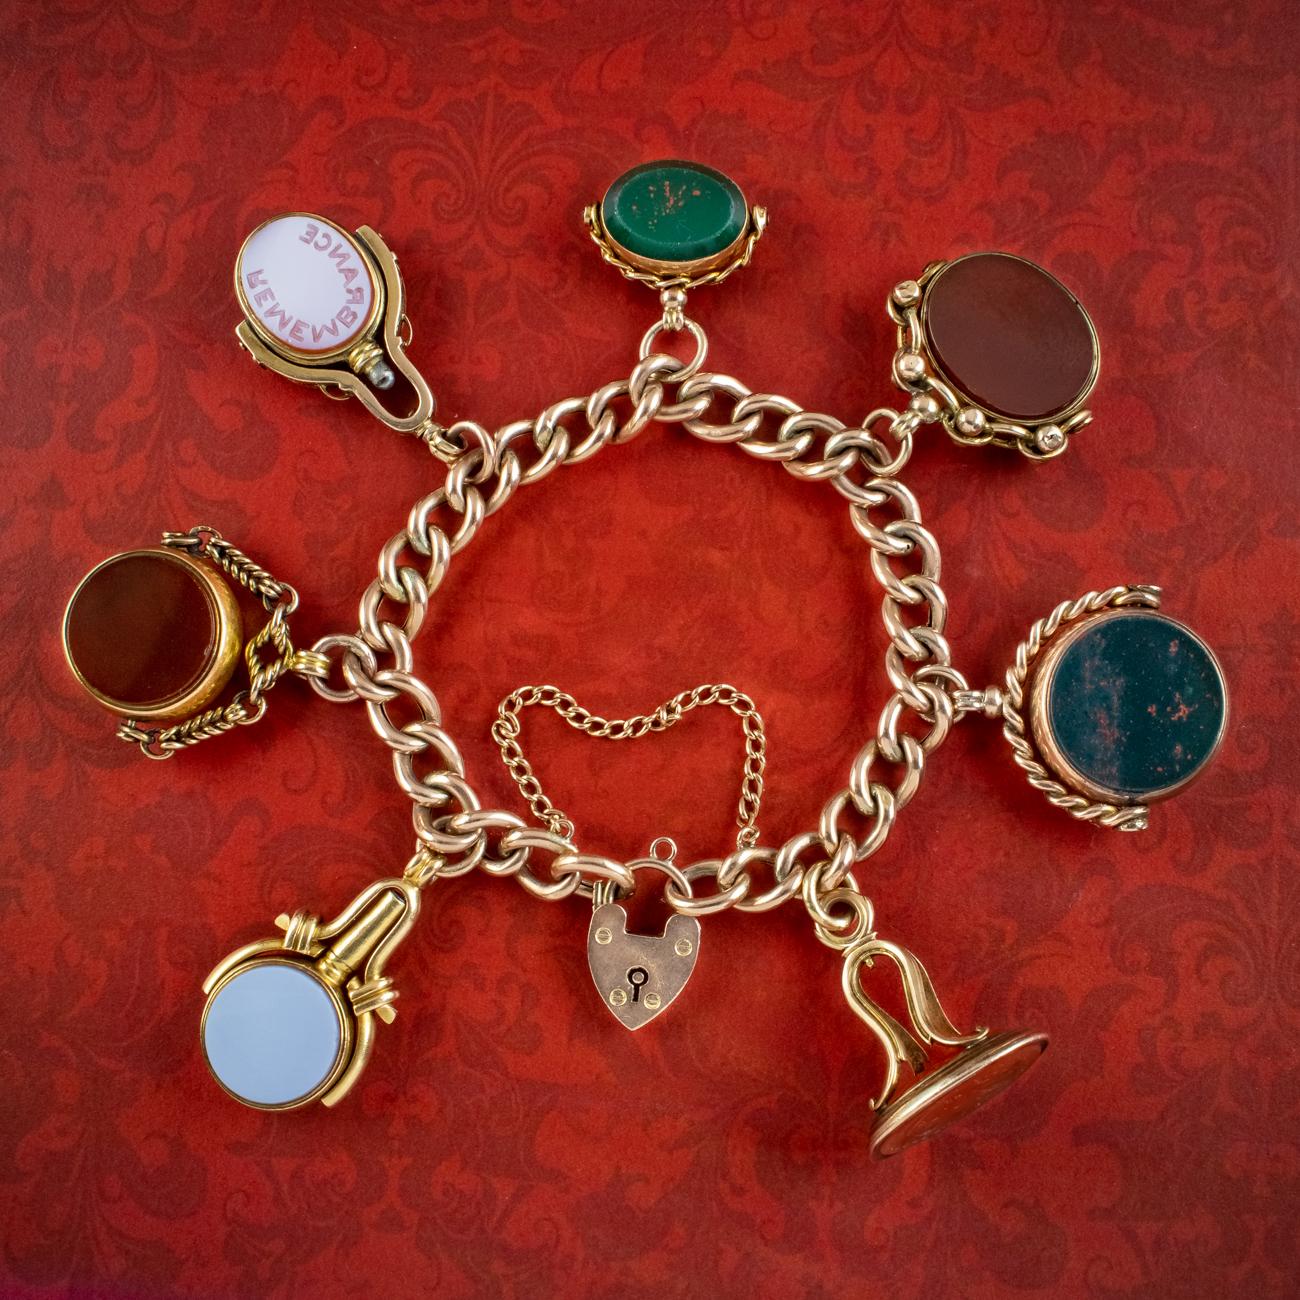 A remarkable antique Victorian 9ct gold curb bracelet from the late 19th Century featuring seven unique fobs, two of which are in the form of watch keys. Each fob can be rotated and is set with bloodstone, carnelian and white agate seals on both